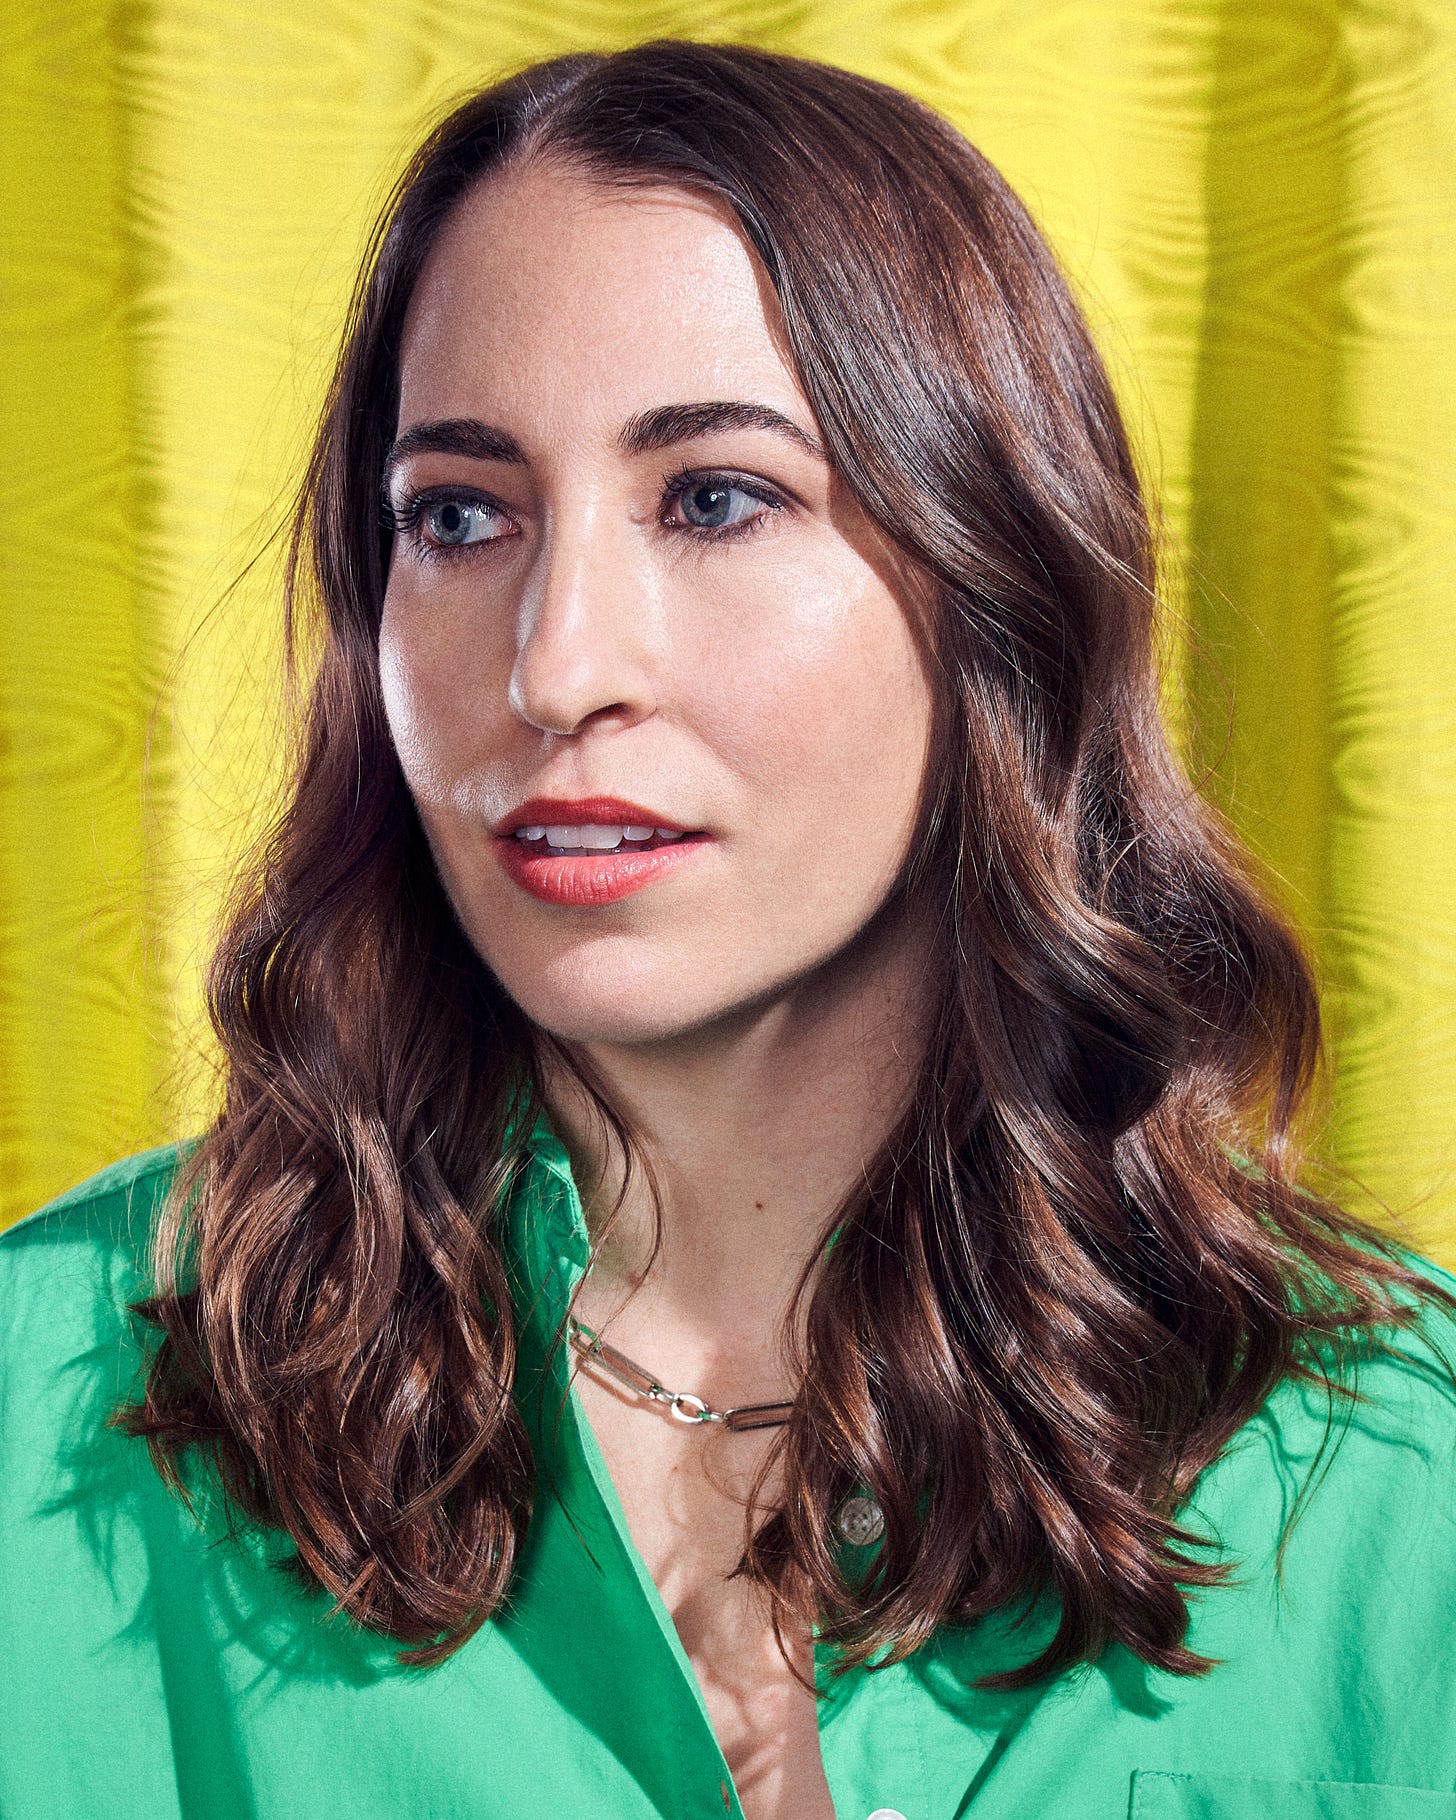 Photo of Rachel Karten wearing a green shirt and looking off in the distance